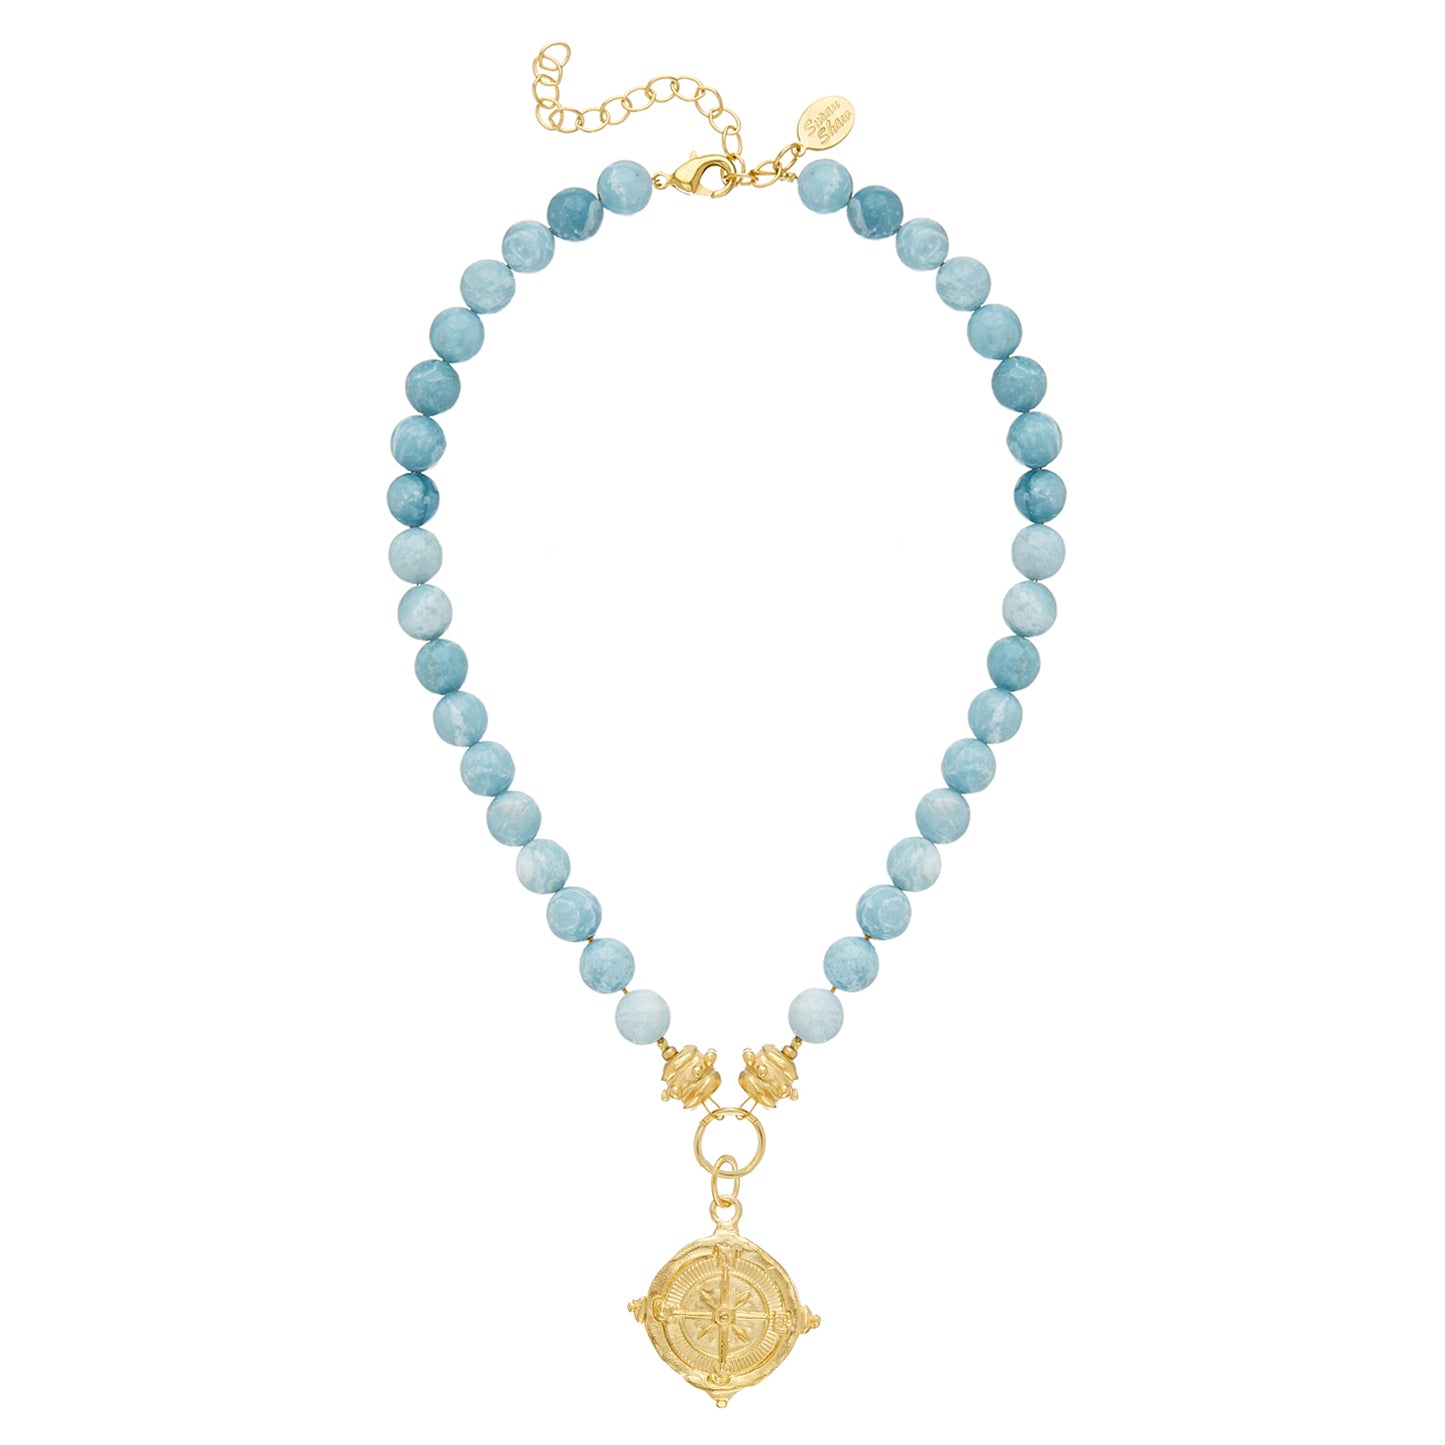 The versatile Blue Jasper Compass Necklace can accompany you from a day at the beach, to a baby shower, and all the way to the boardroom. Its delicate design features swirling soft blue Jasper beads and a gold compass pendant, adding a touch of boldness and femininity to any event. Created by Susan Shaw, the Nellie Necklace is playful yet polished, and comes with a 16" chain and a 3" extender.